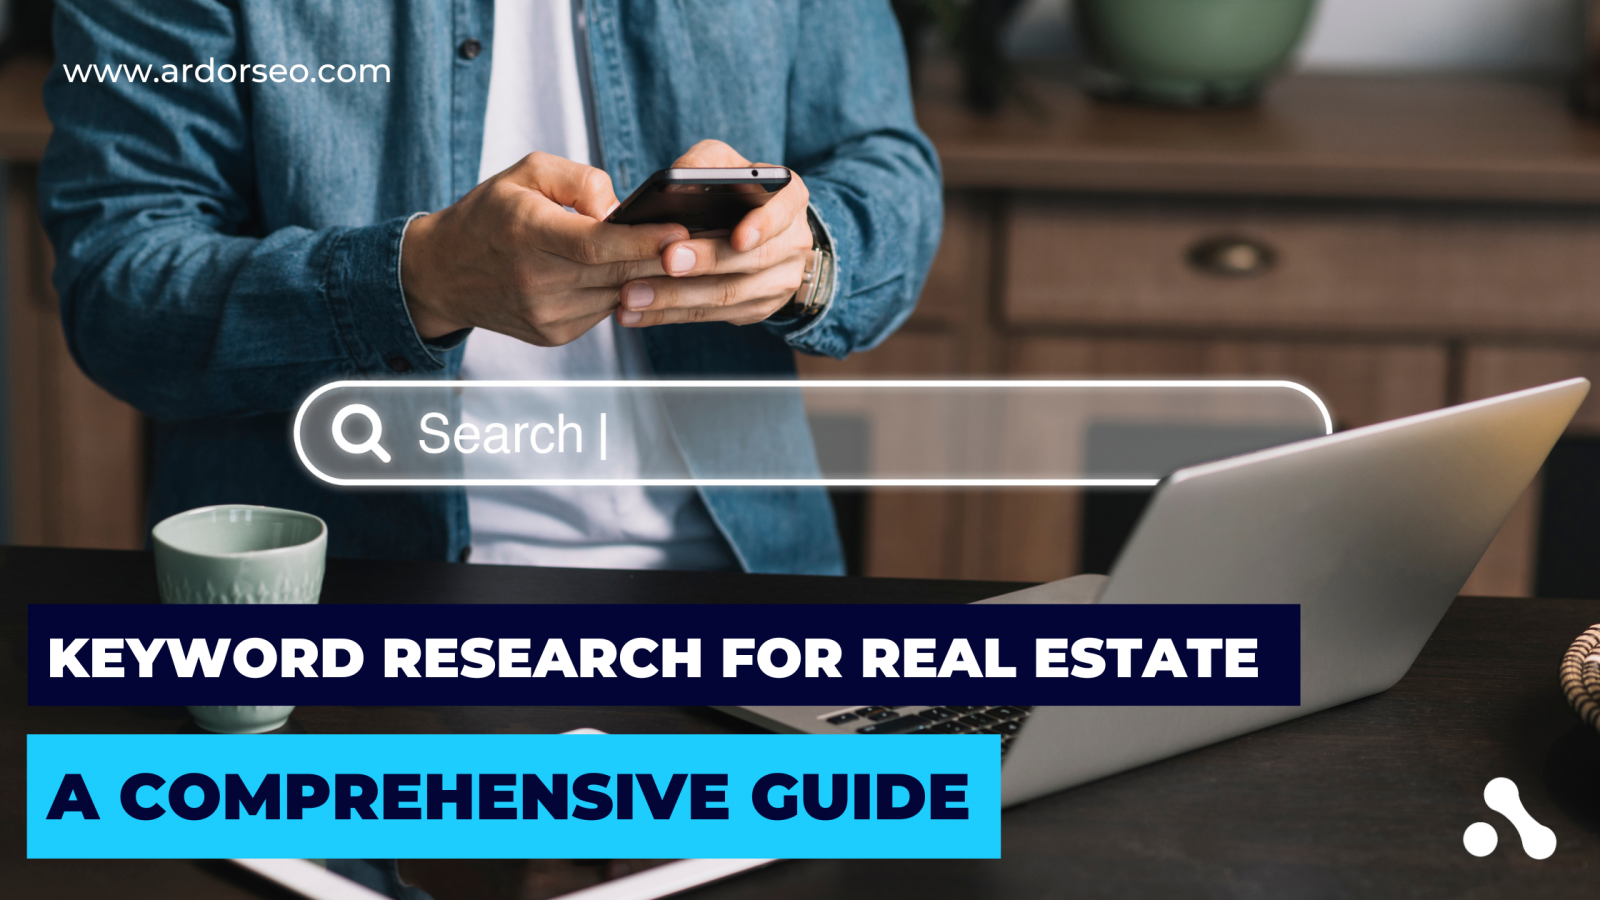 Let's explore how to use the best real estate keywords.